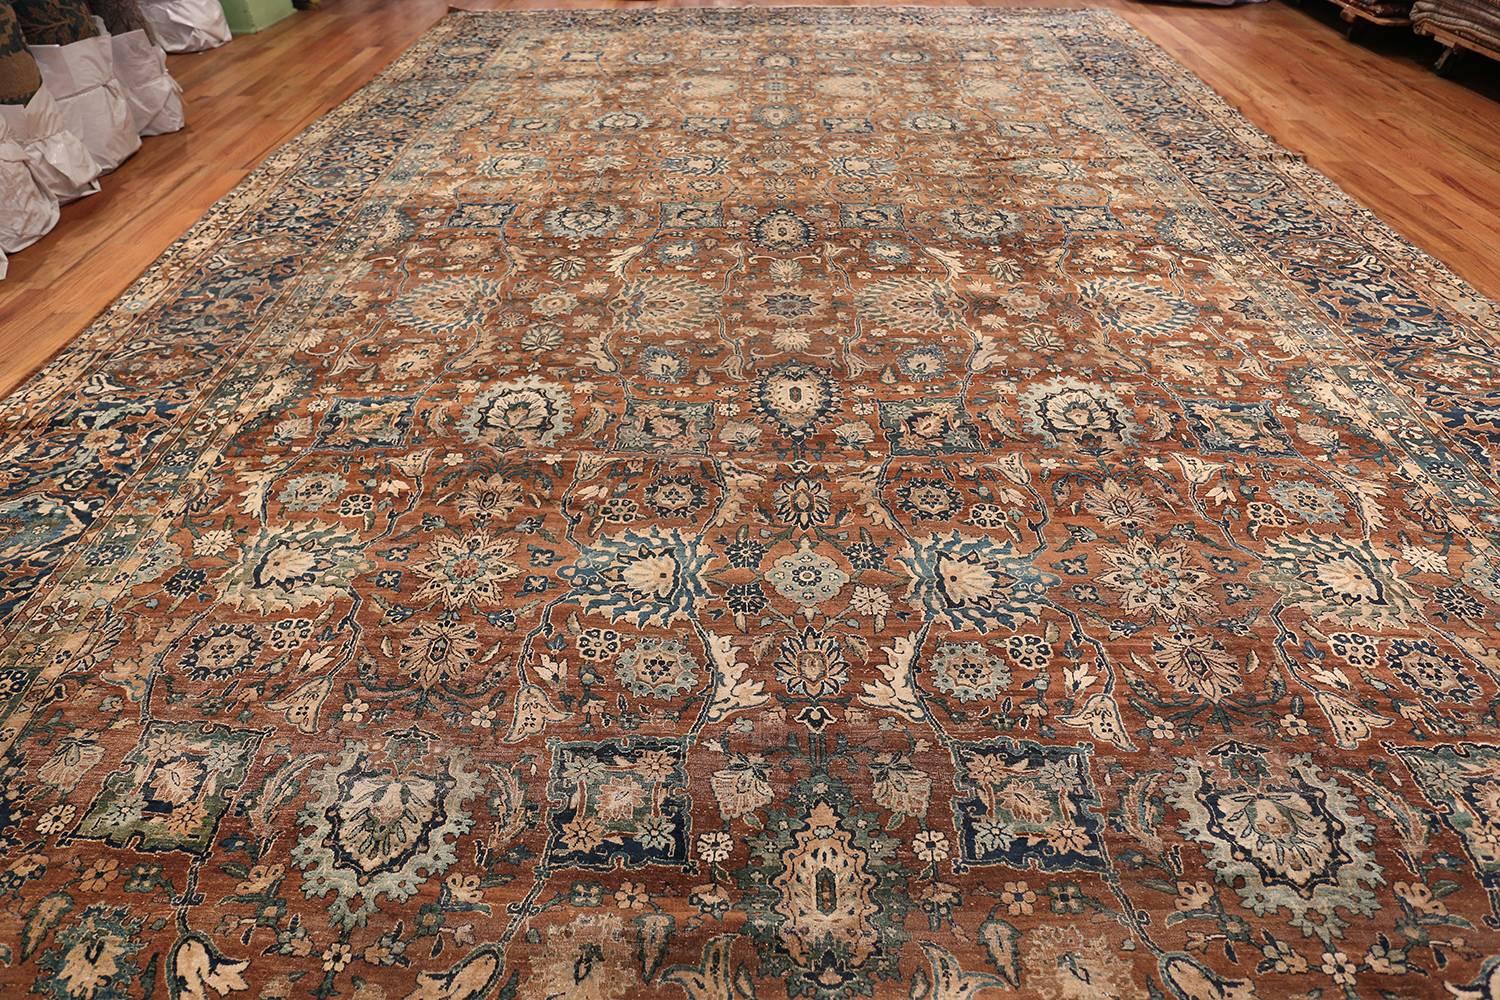 Extremely fine and decorative oversized antique Persian Kerman carpet, country of origin / rug type: Persian rug, date circa 1920. Size: 12 ft. 7 in x 24 ft. 10 in (3.84 m x 7.57 m)

The rich earthy brown background of this elegant antique Persian